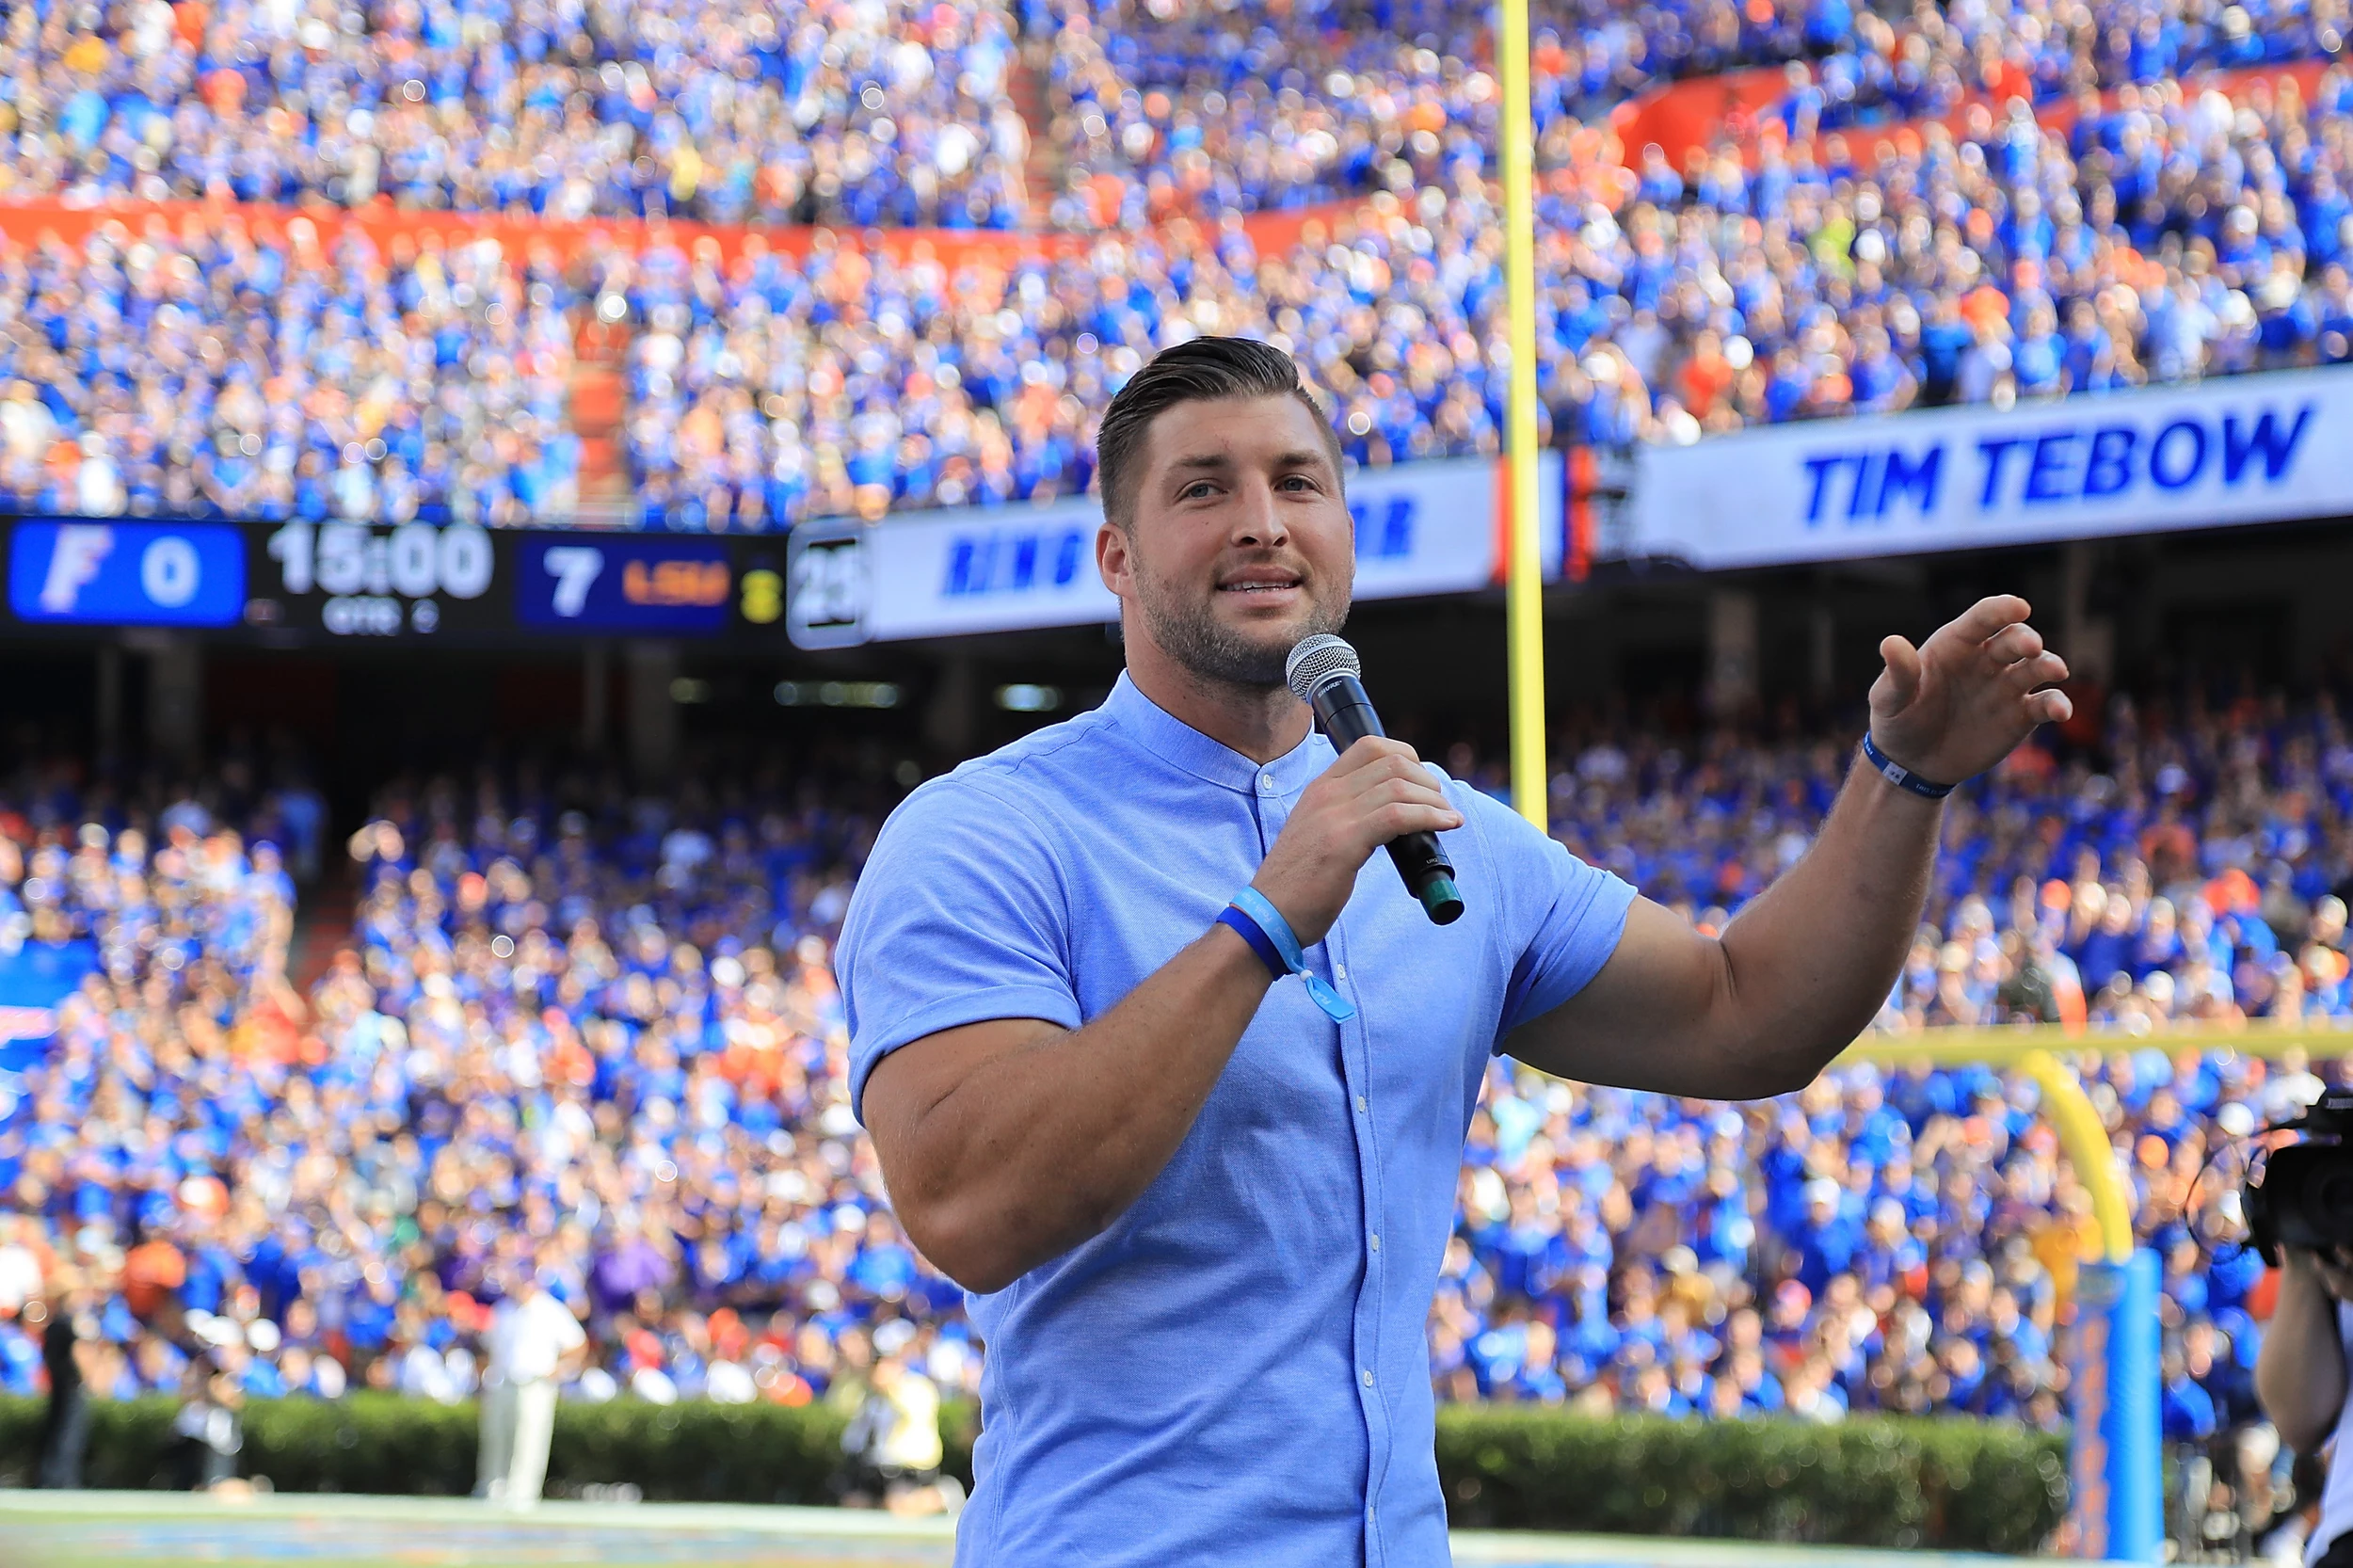 The Mets finally are admitting that Tim Tebow wasn't signed for baseball  reasons